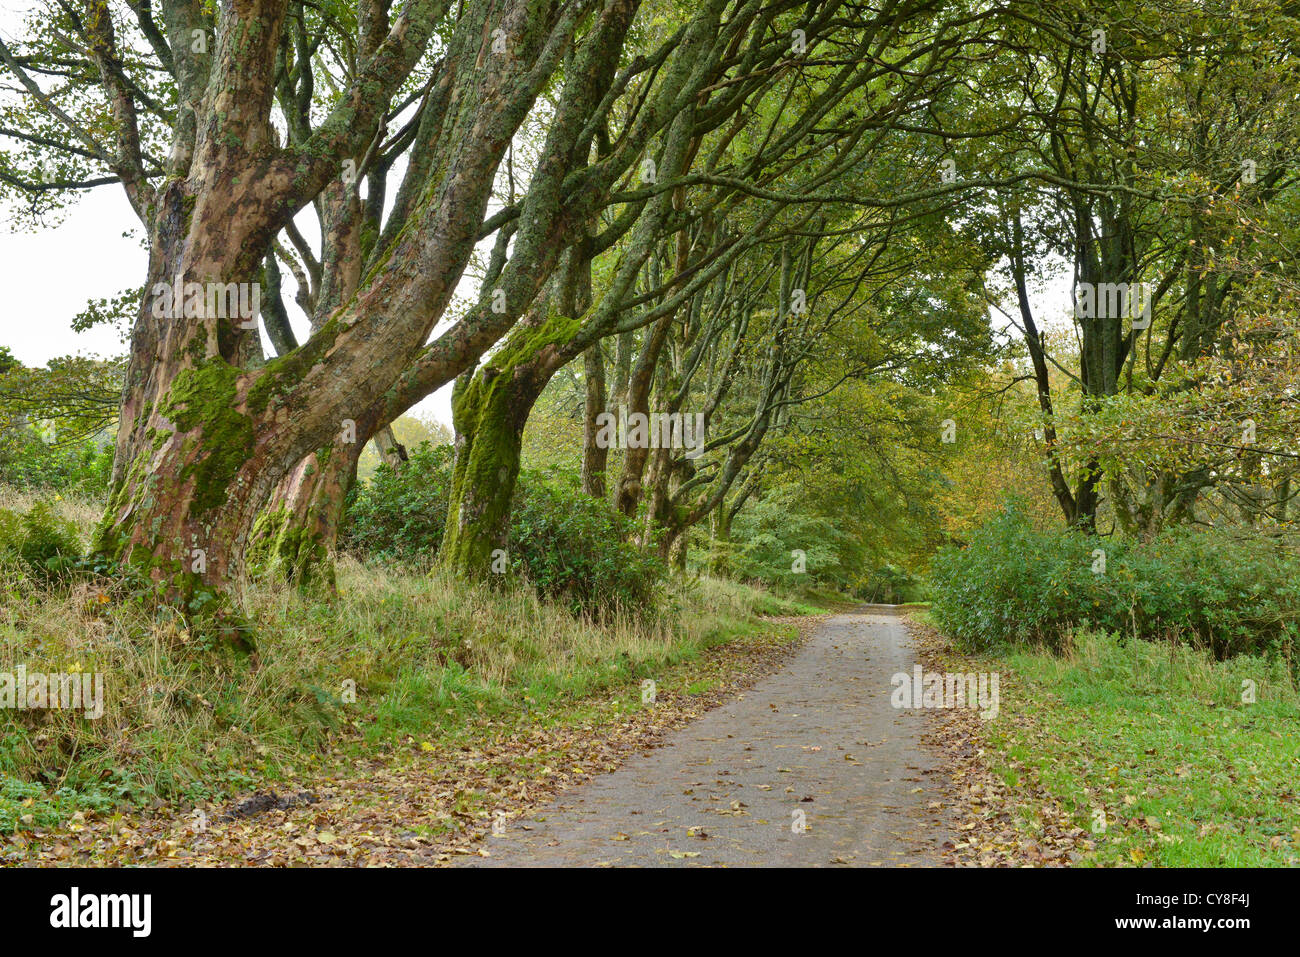 Autumn and leaves falling from trees overhanging country road. Kintyre peninsula, Scotland Stock Photo